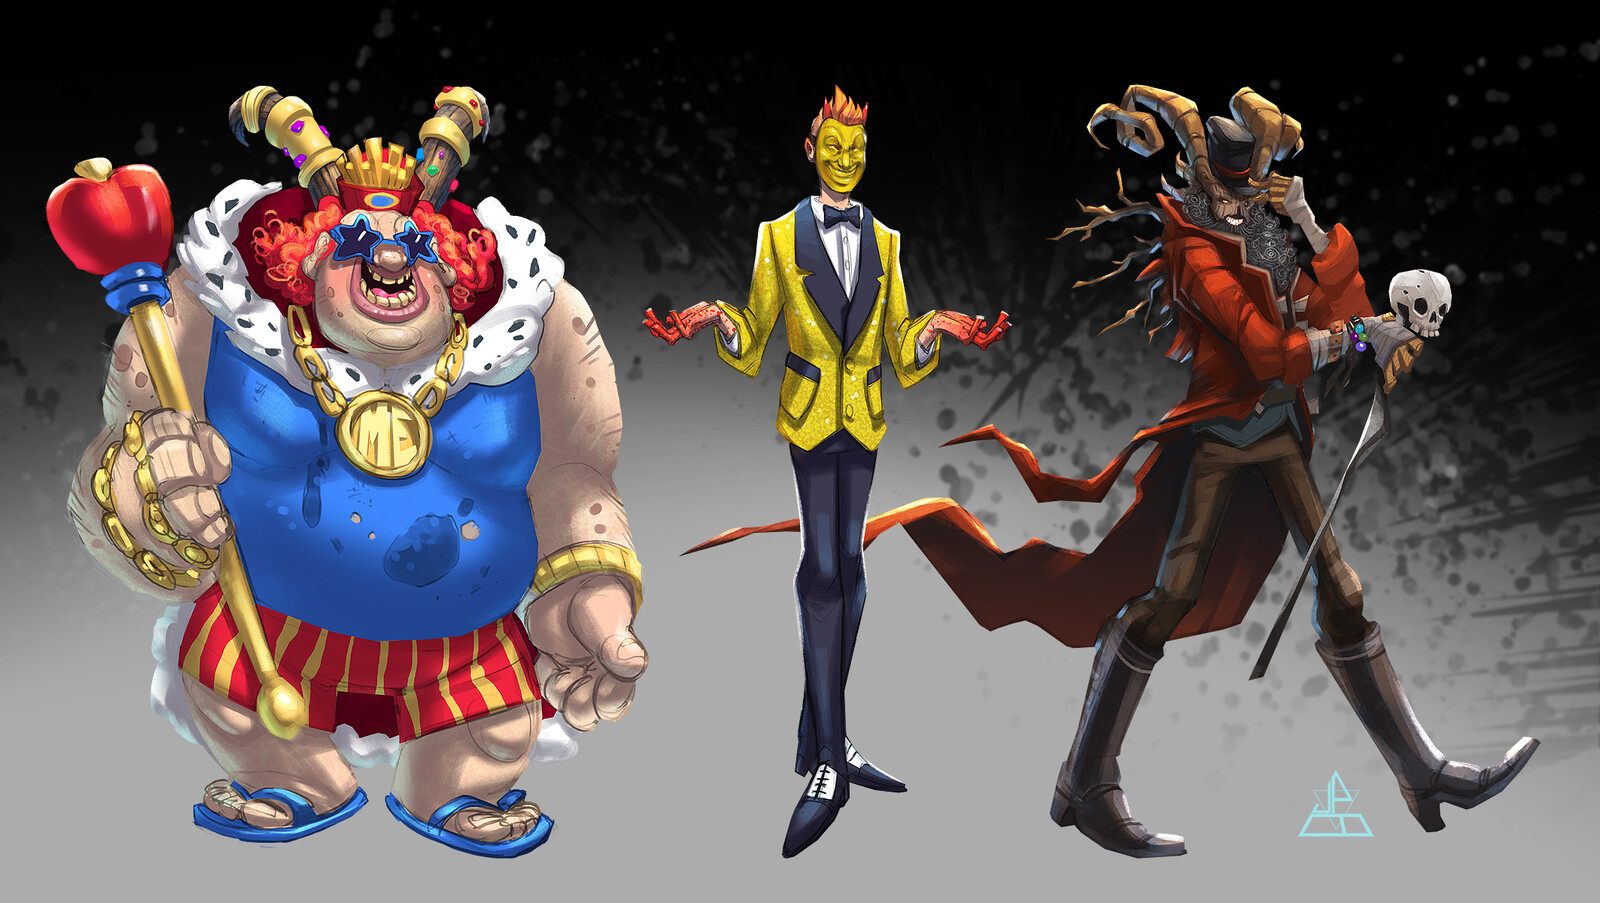 Plenty King, Mister Smiley and the Jolly Rambler - 3 of the pop culture demons encountered in the game.